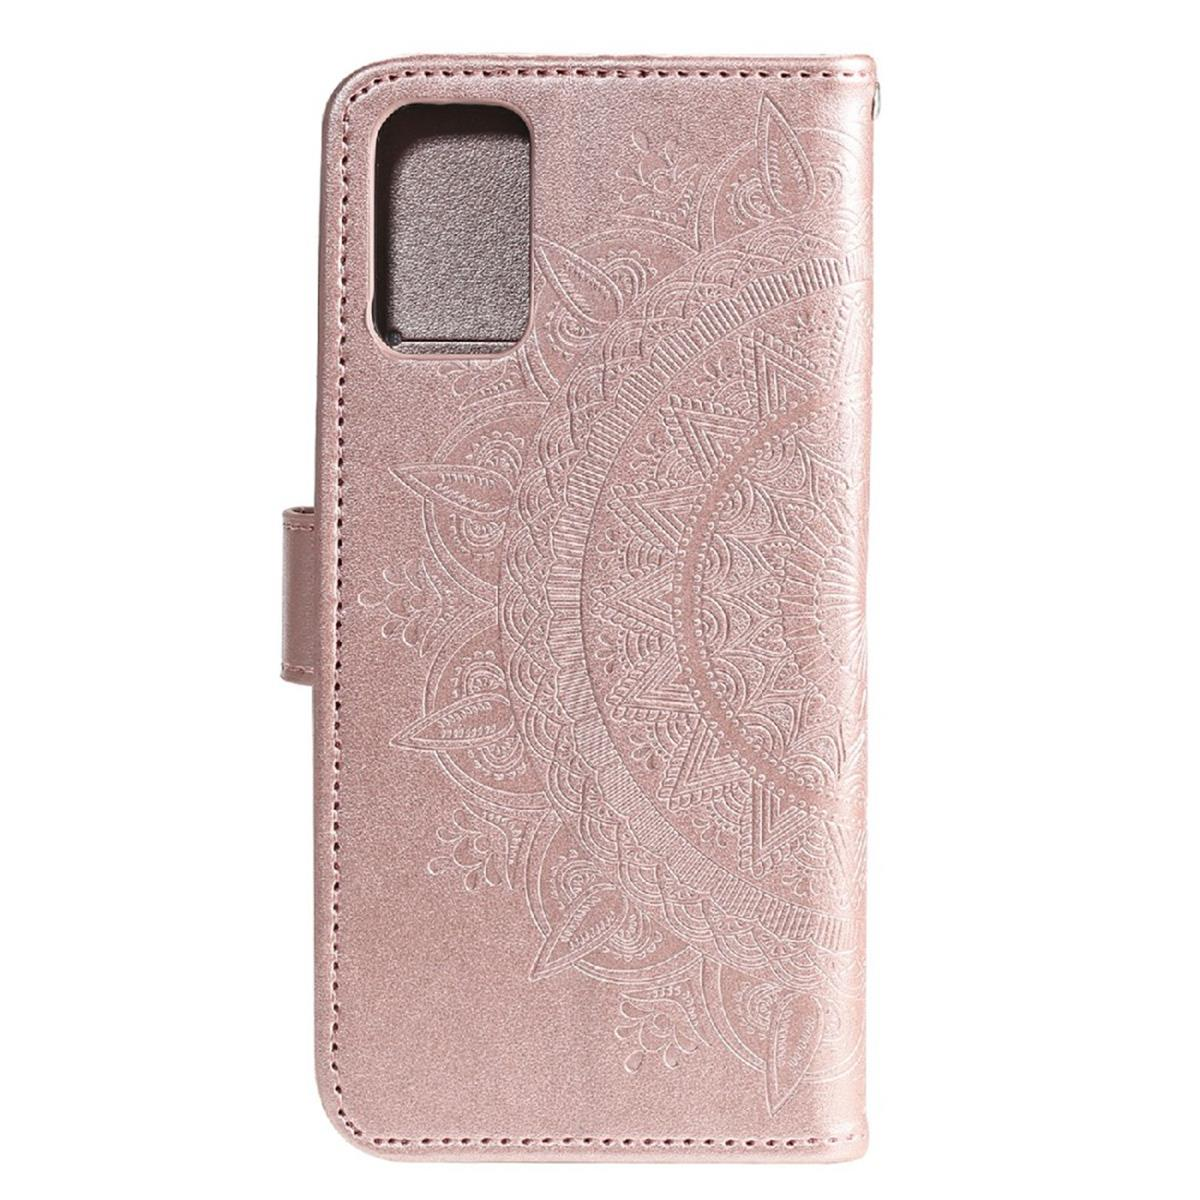 COVERKINGZ Klapphülle mit Muster, A03s, Mandala Rosegold Galaxy Samsung, Bookcover